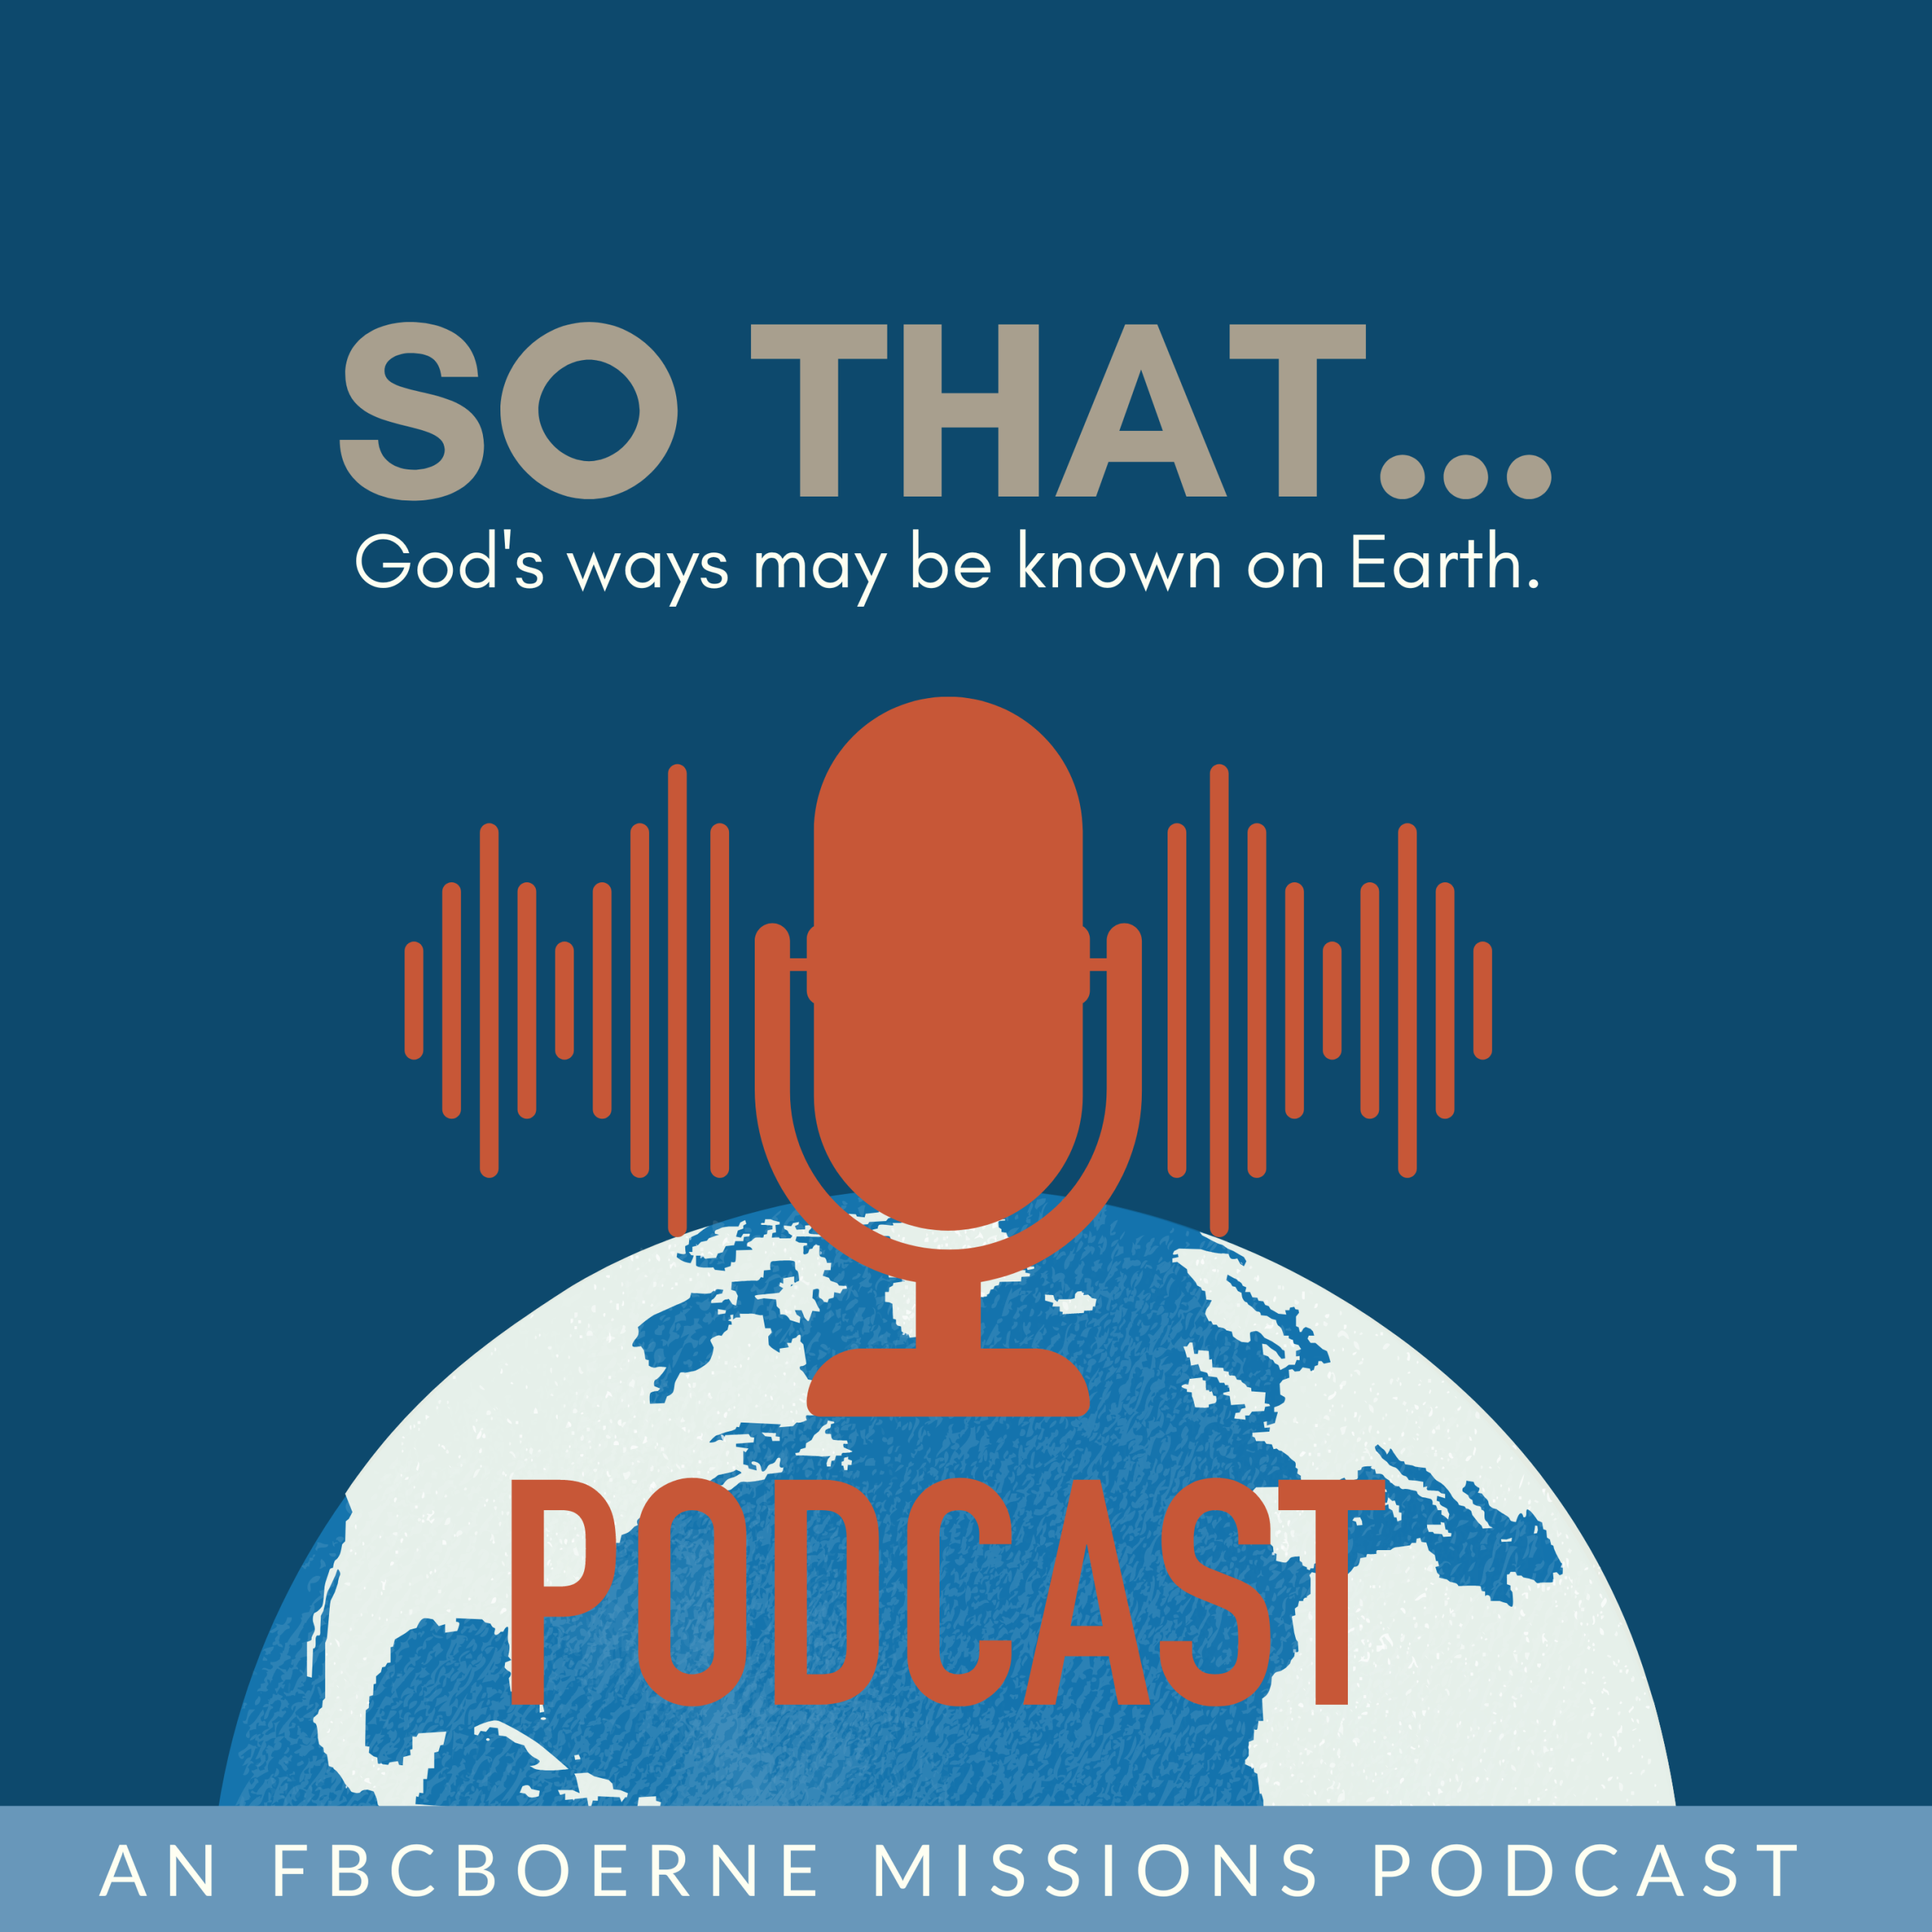 Why do a missions focused podcast? Why do we need stories? Image